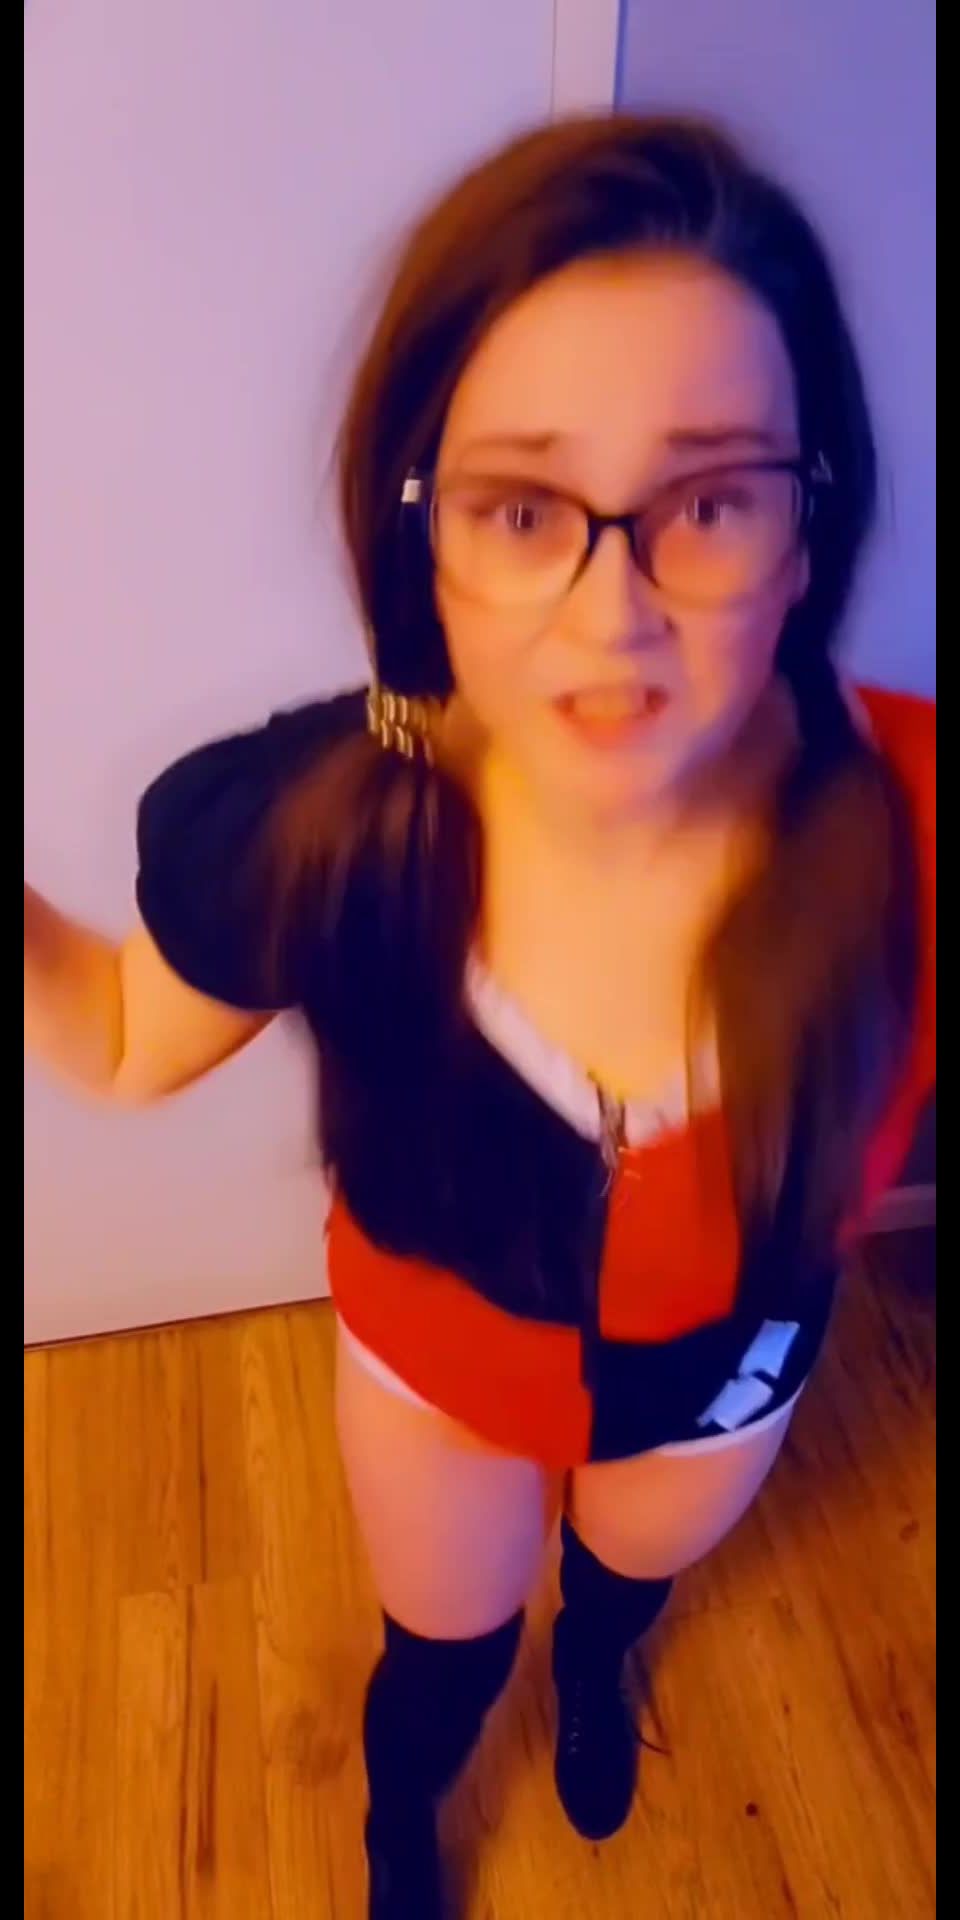 M@nyV1ds - CaityFoxx - Harley Quinn Sexy Cosplay Compilation